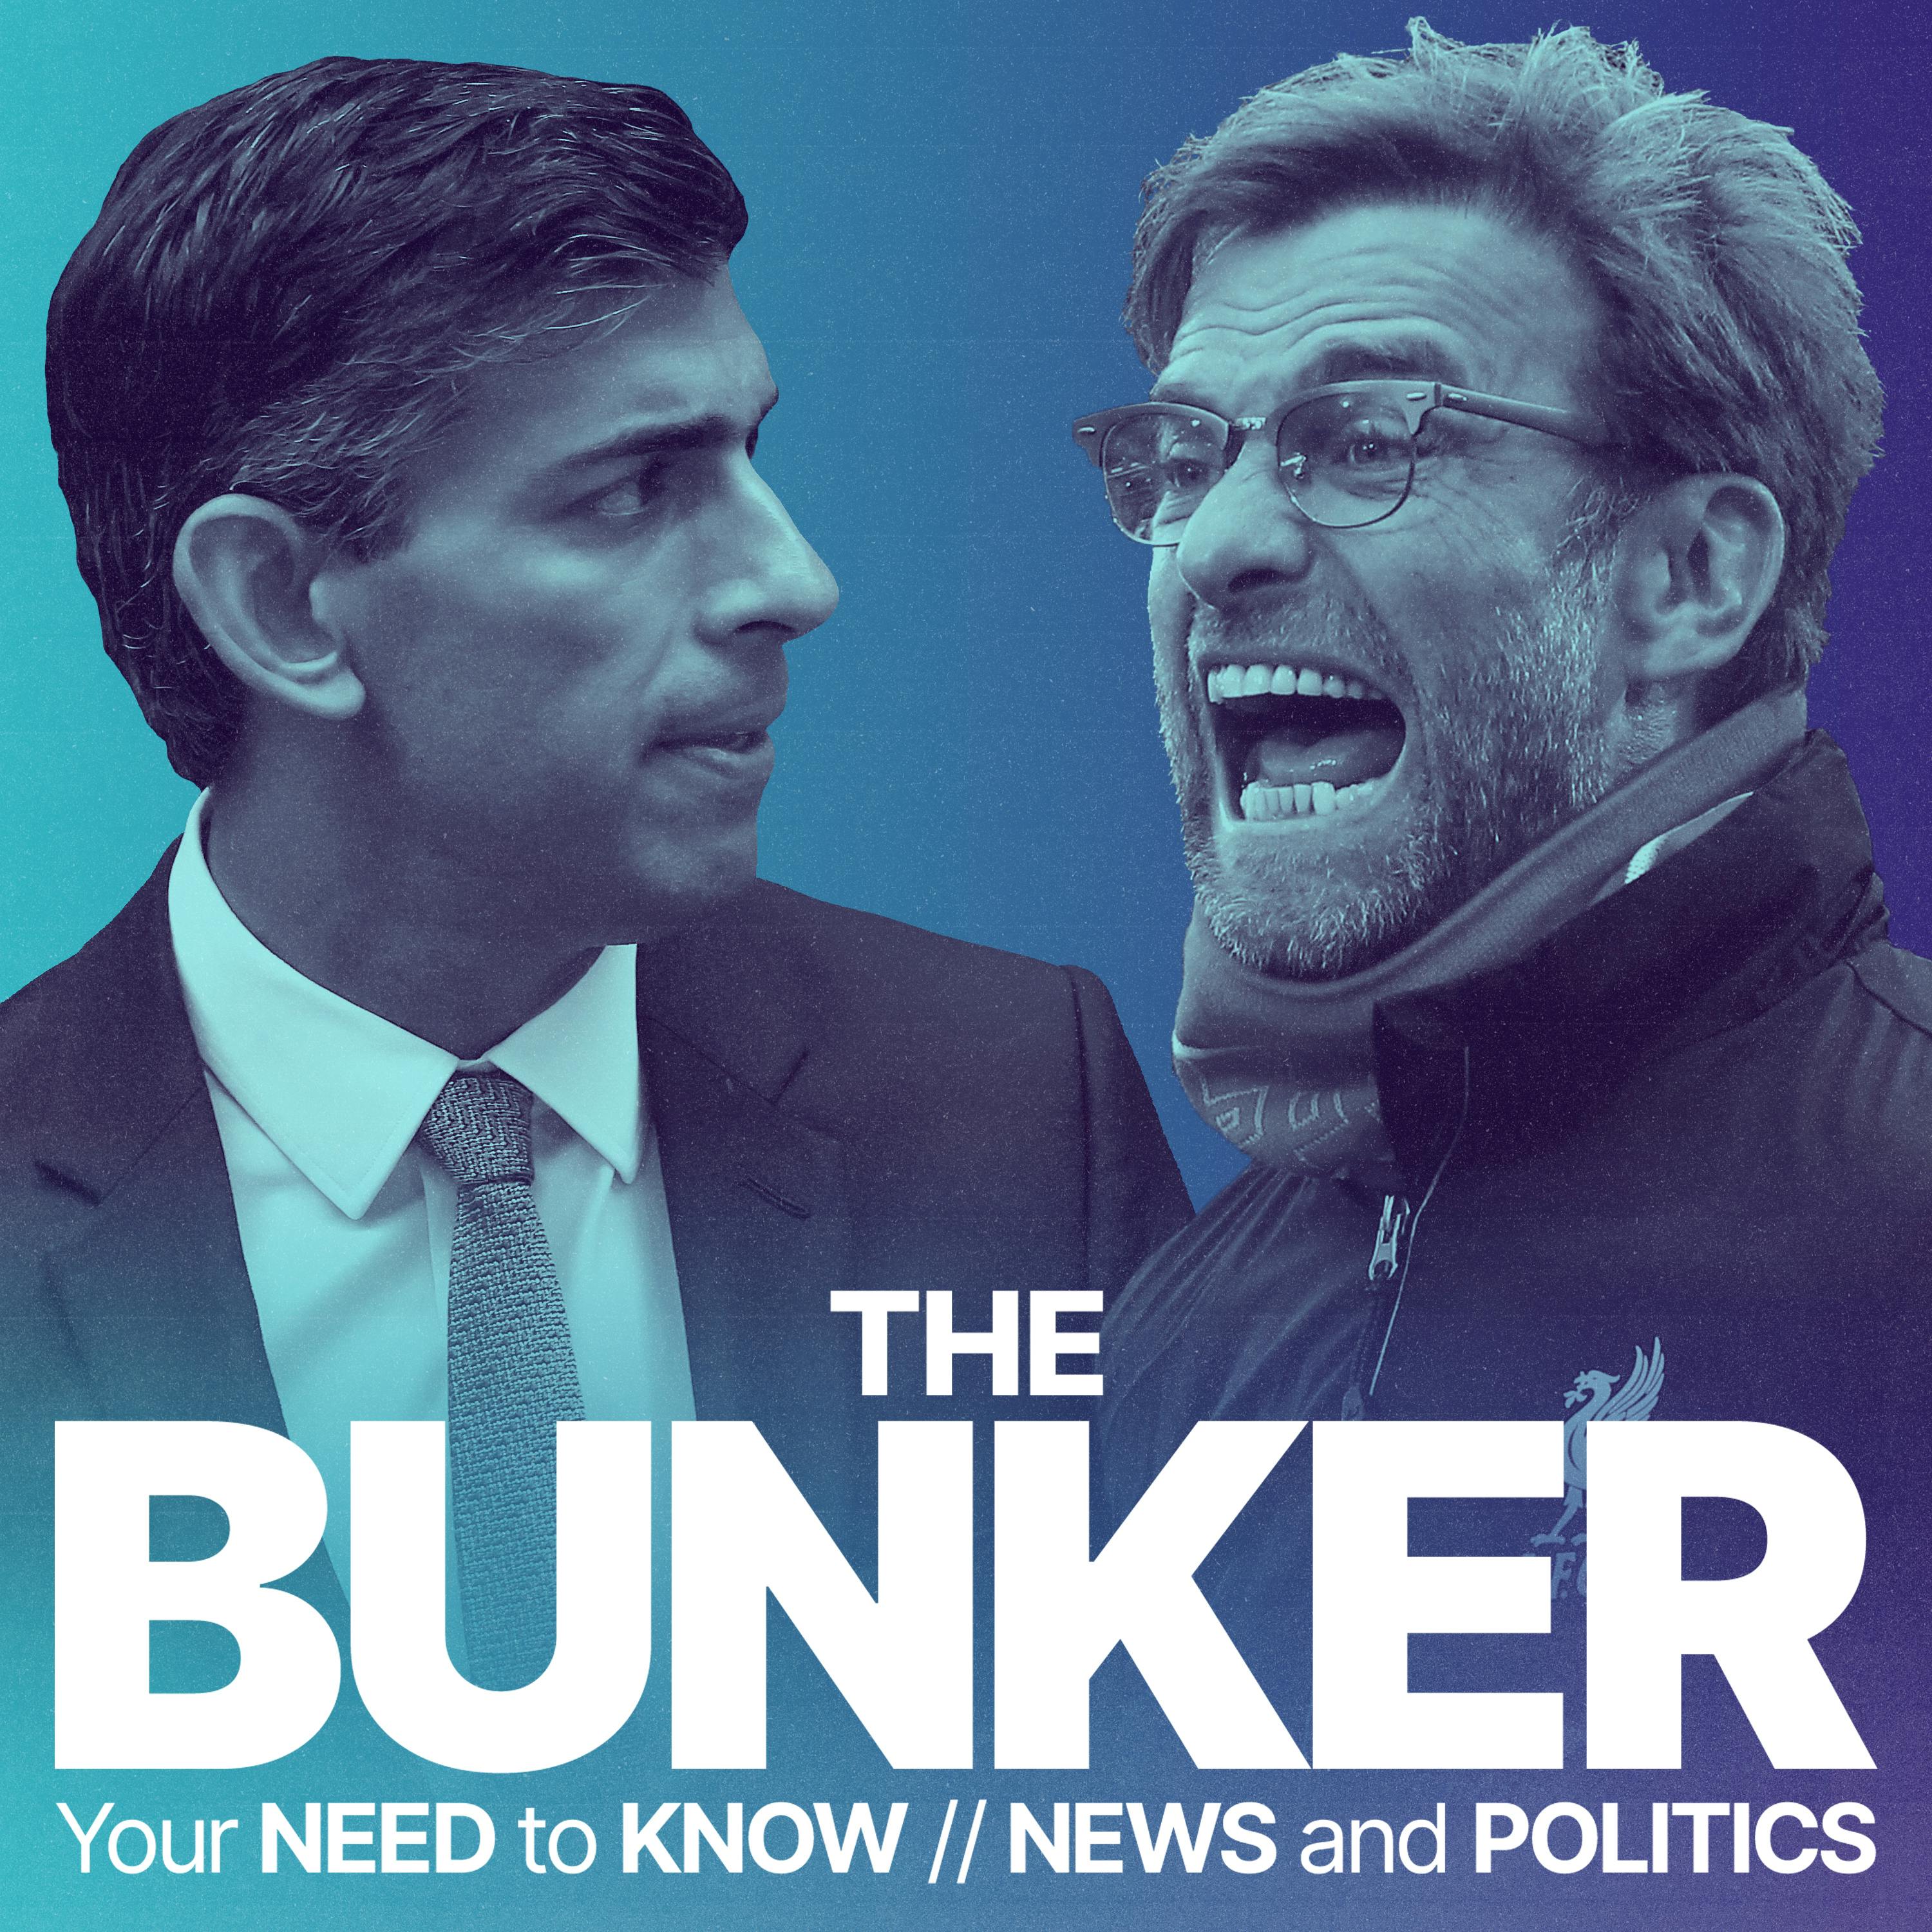 Why can’t politicians quit while they’re ahead like Klopp did?